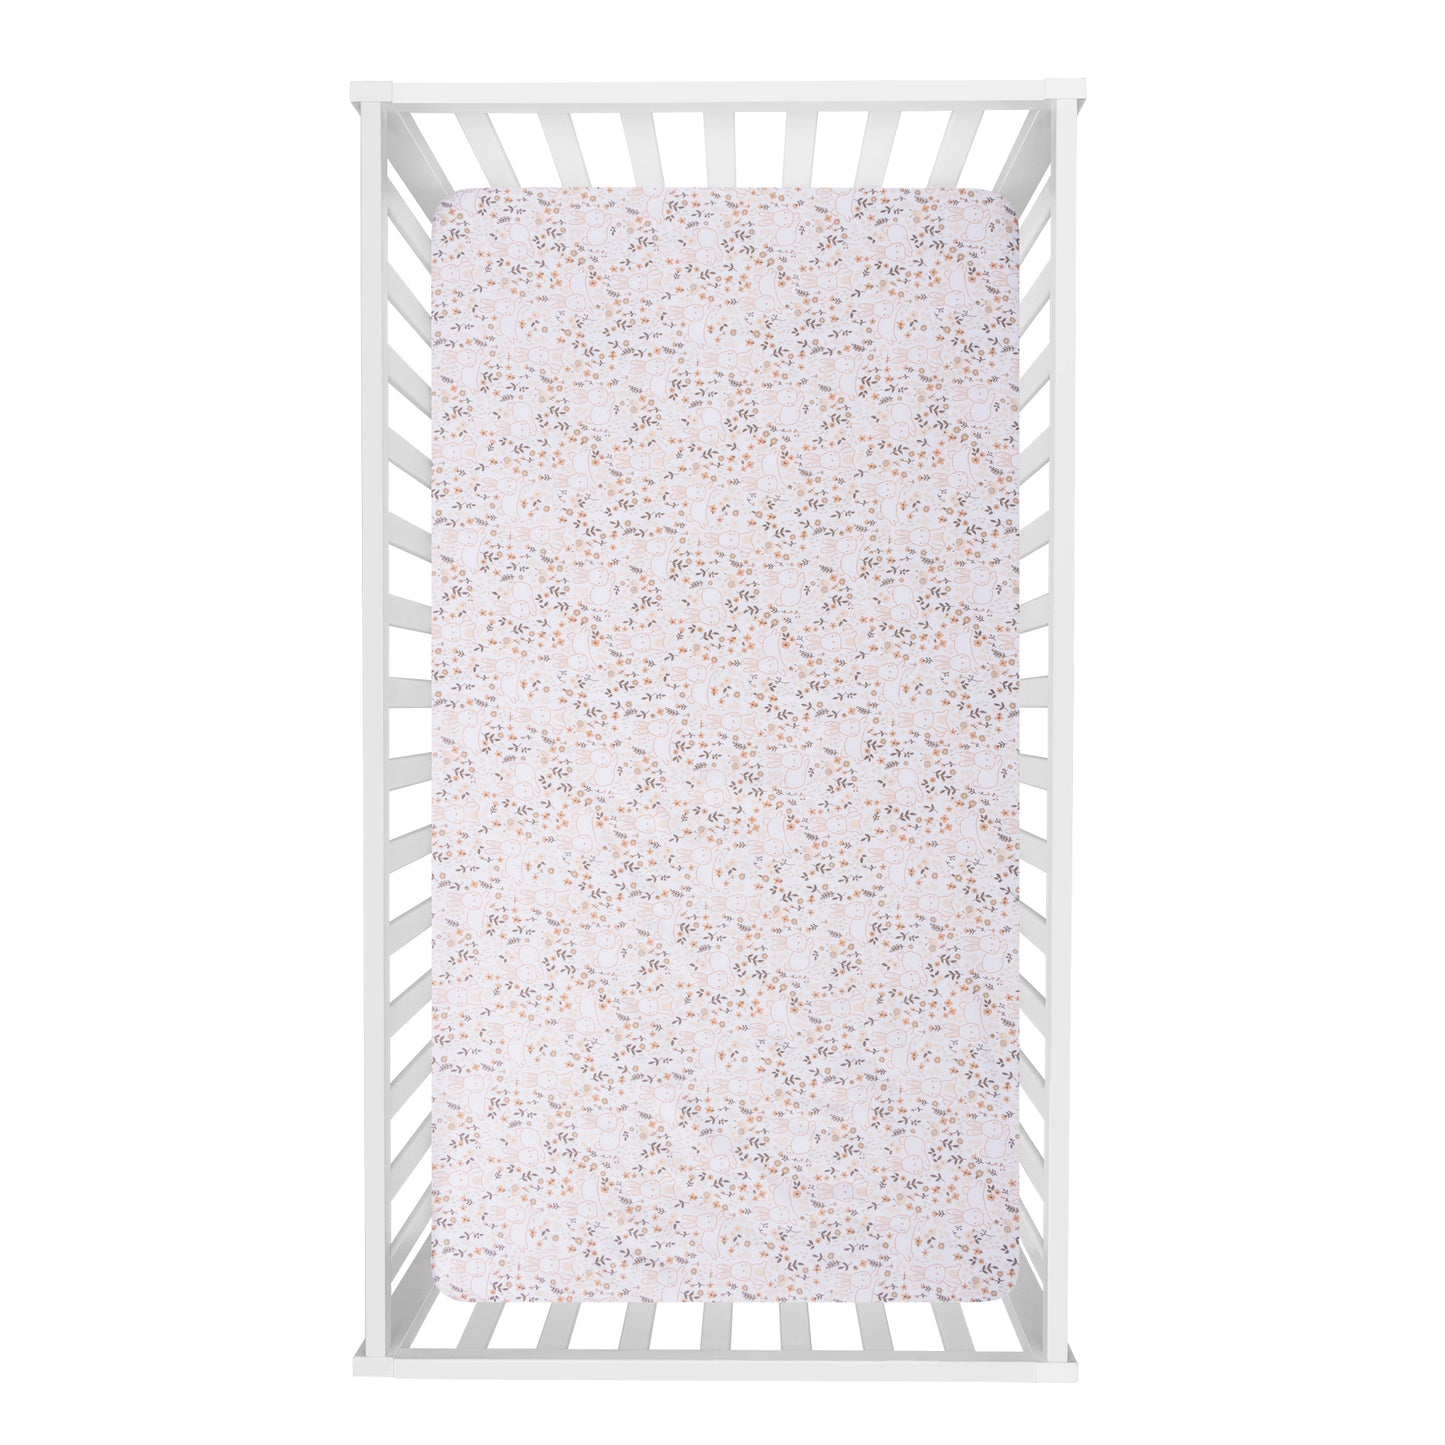 Fitted crib sheet fits standard crib mattress 28 in x 52 in with 8-inch-deep pockets and is fully elasticized for a secure fit. Crib sheet features sweet little cottontail bunnies surrounded by flowers in soft pink, rose, opal gray and mushroom.